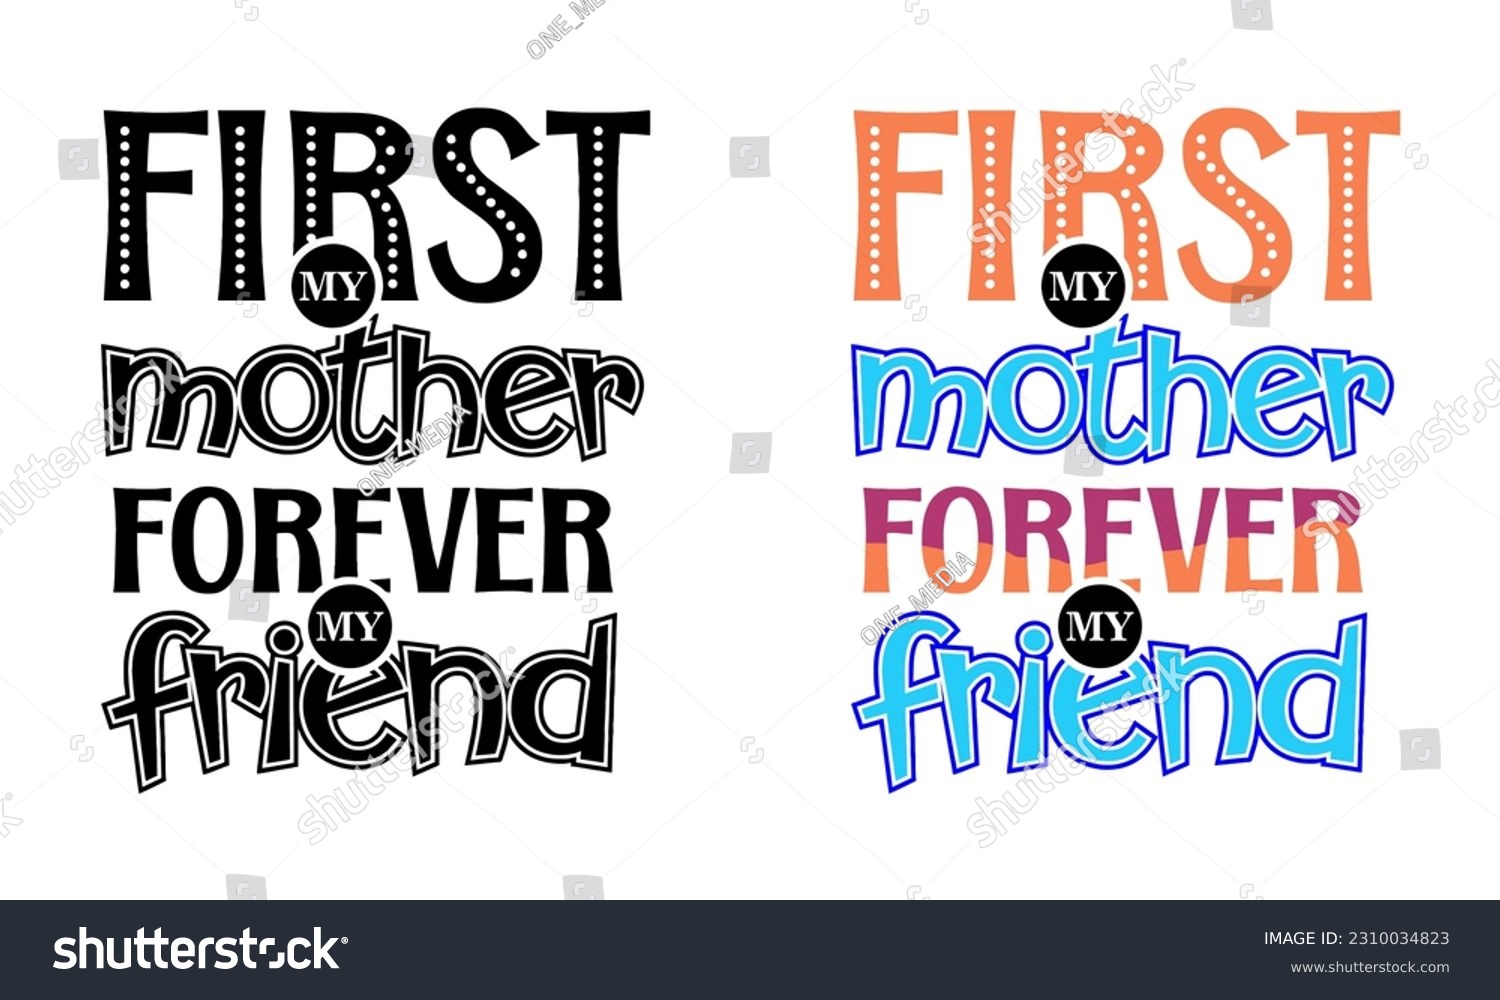 SVG of First My Mother Forever My Friend, Mother Day design concept, can be used for t-shirts, stickers, etc.
 svg